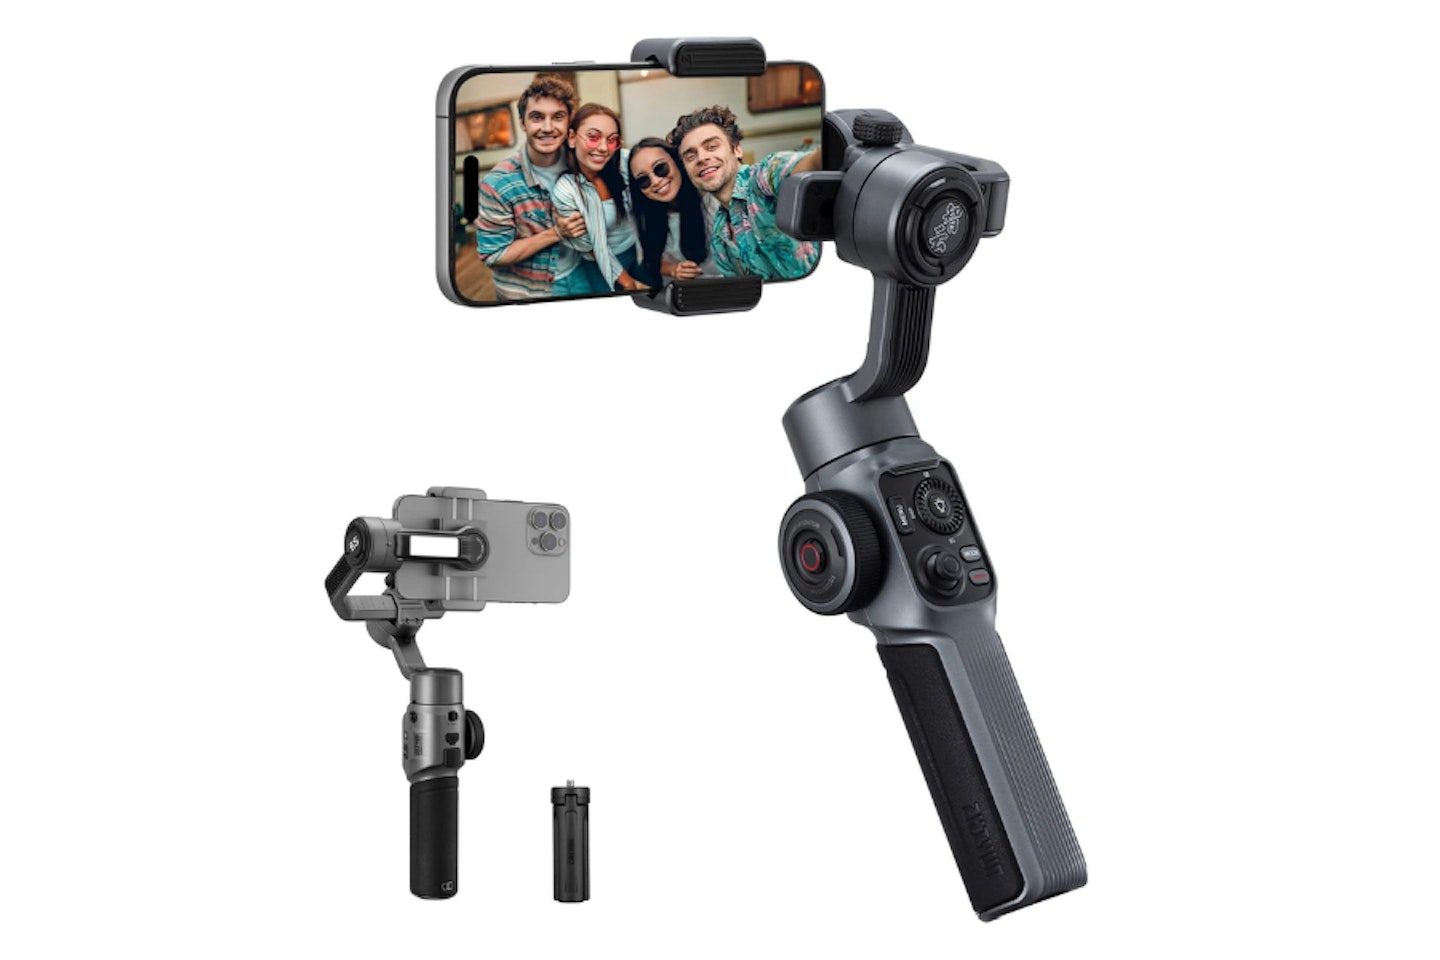 ZHIYUN Smooth 5S Gimbal Stabilizer - possibly the best smartphone gimbal